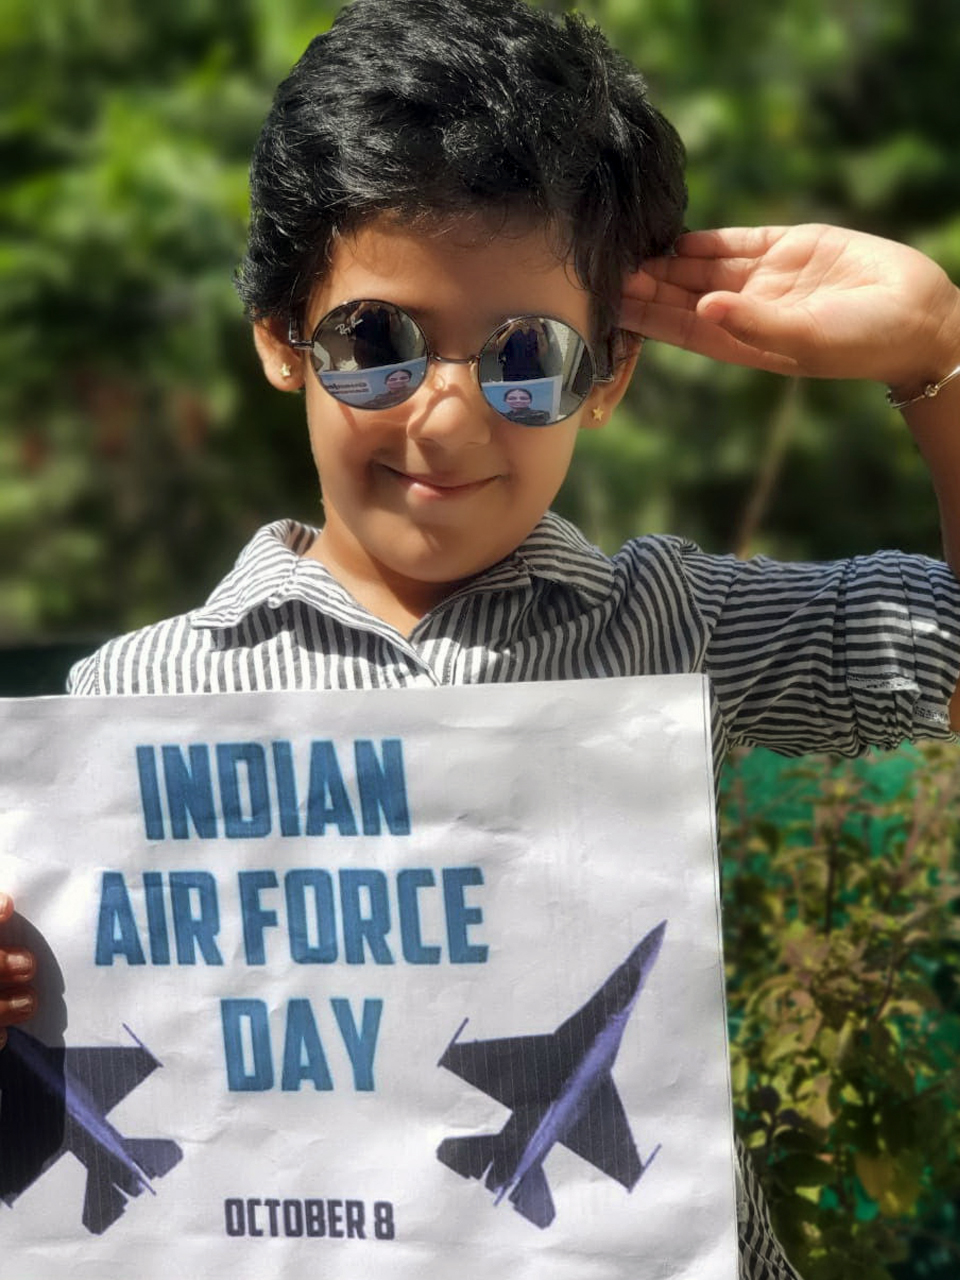 Indian Air Force is celebrated on October 8